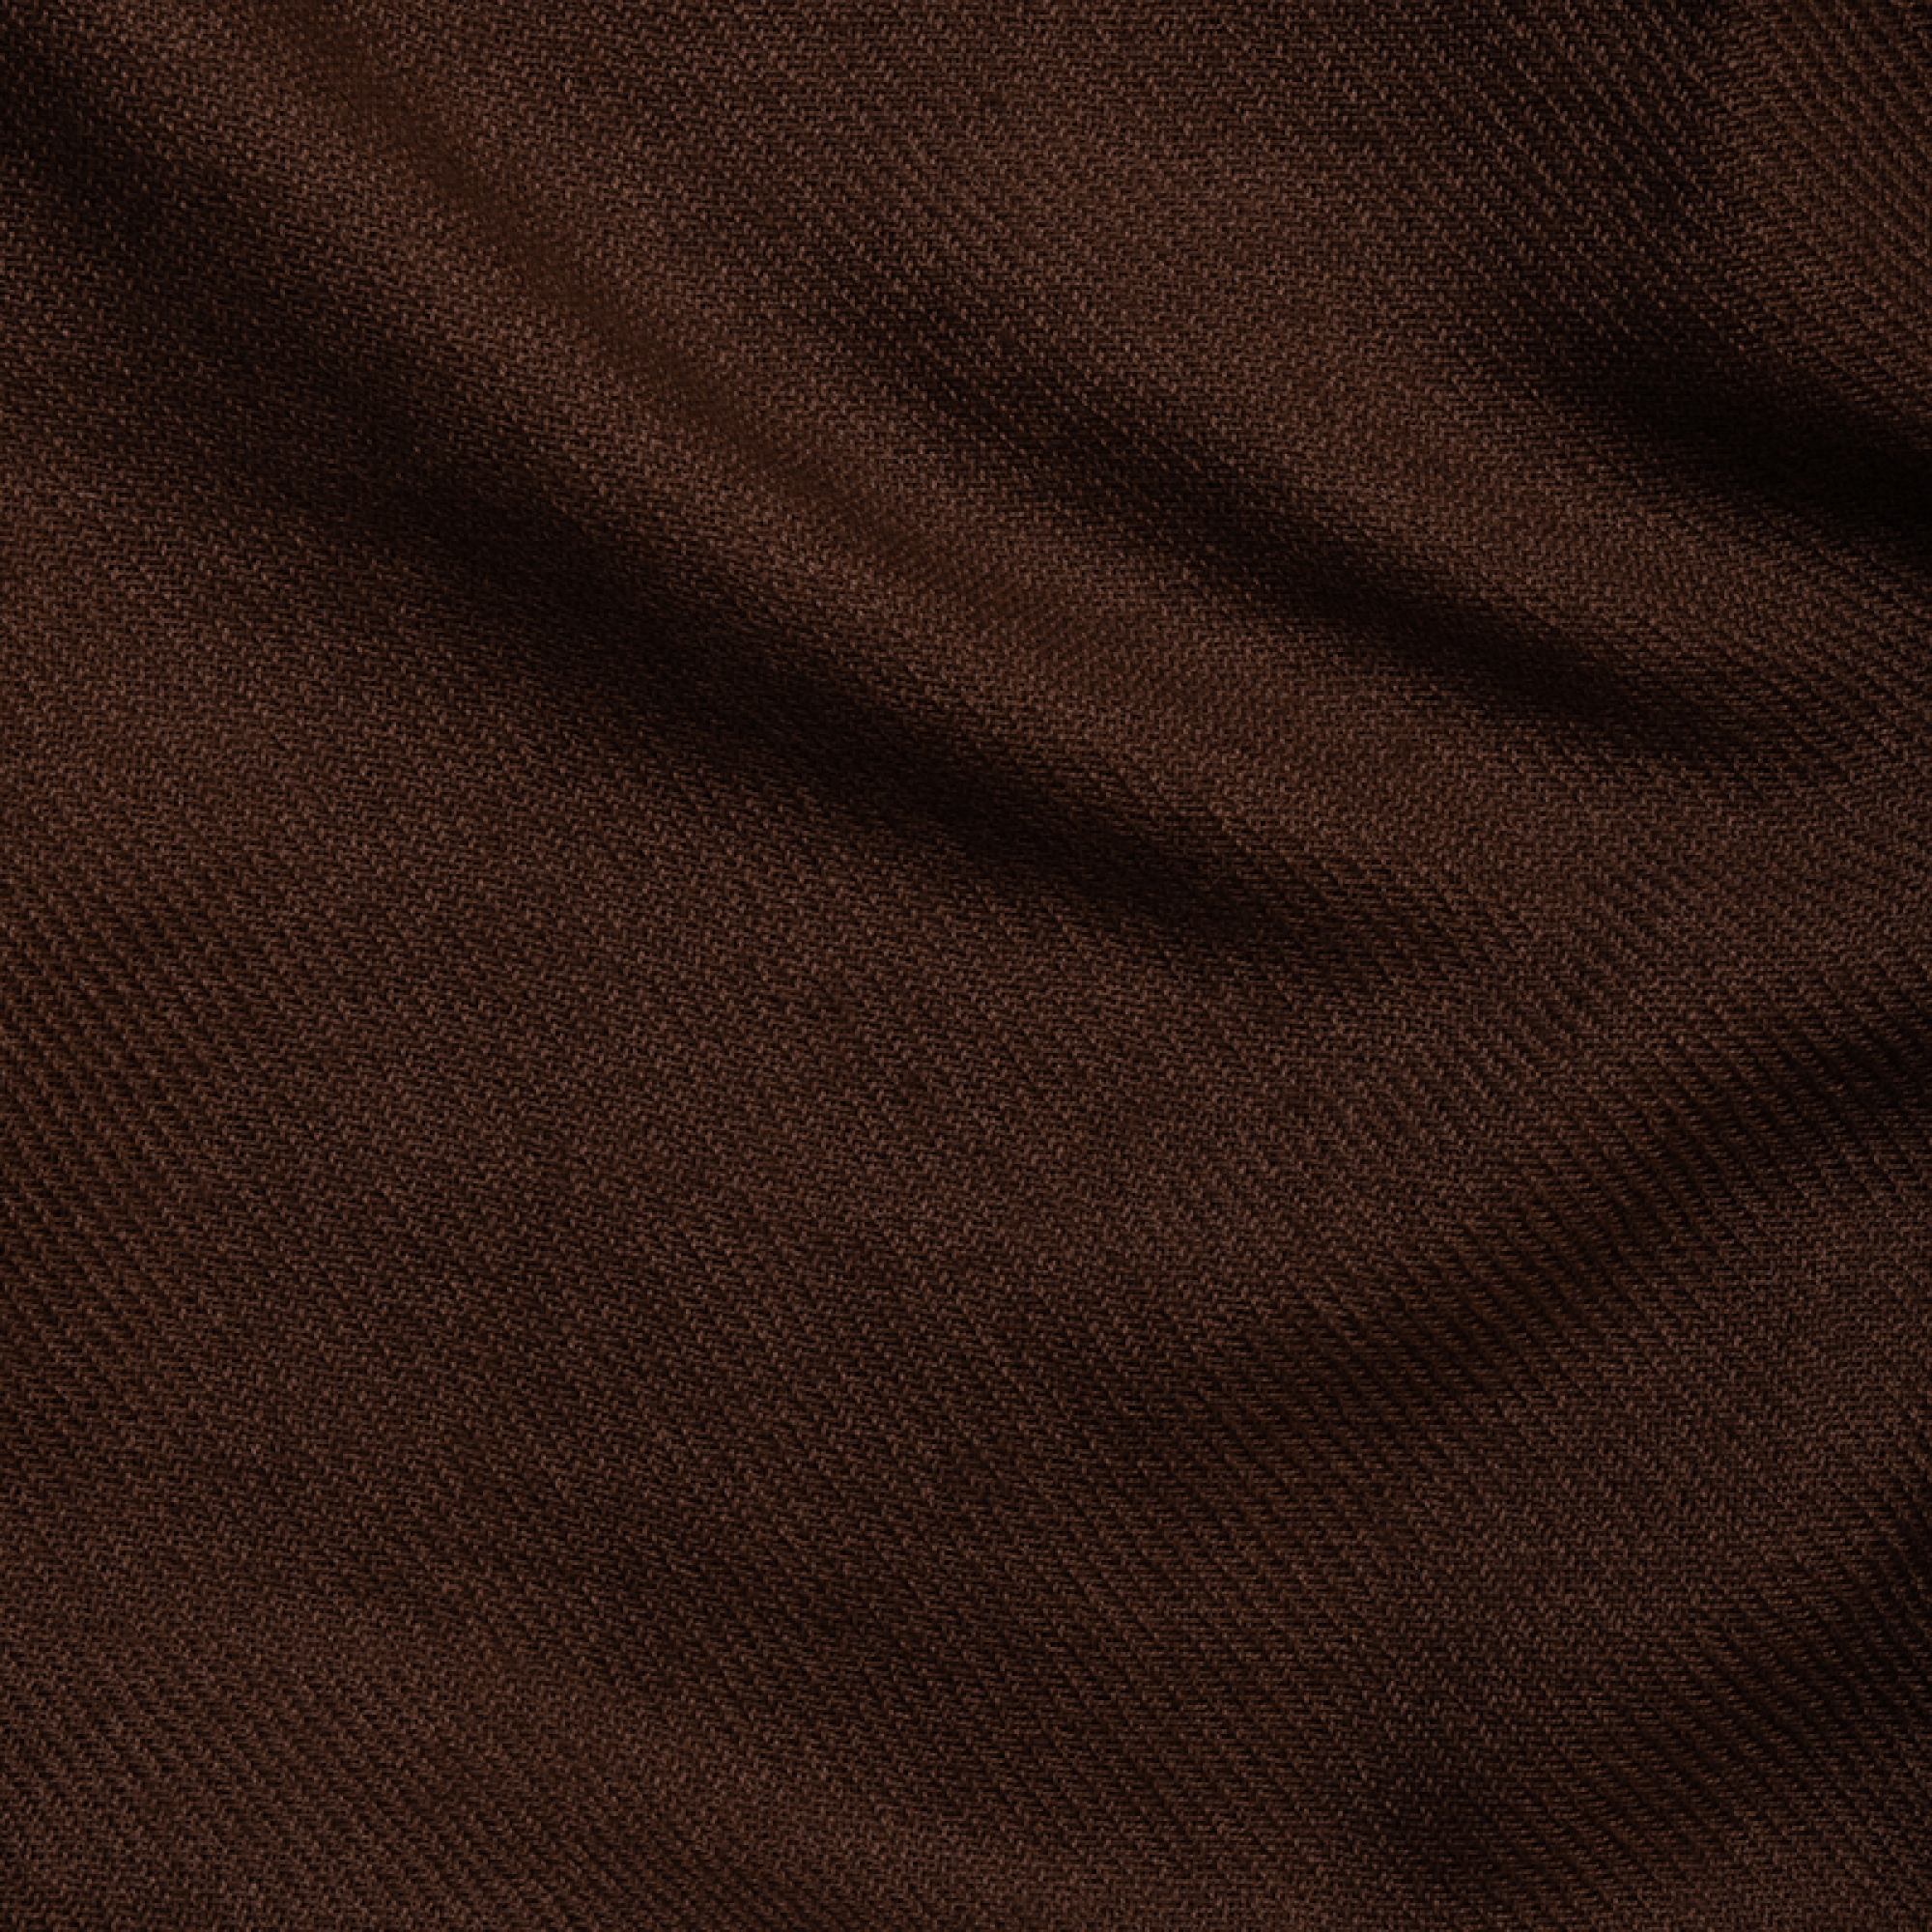 Cashmere accessories exclusive toodoo plain s 140 x 200 cacao 140 x 200 cm